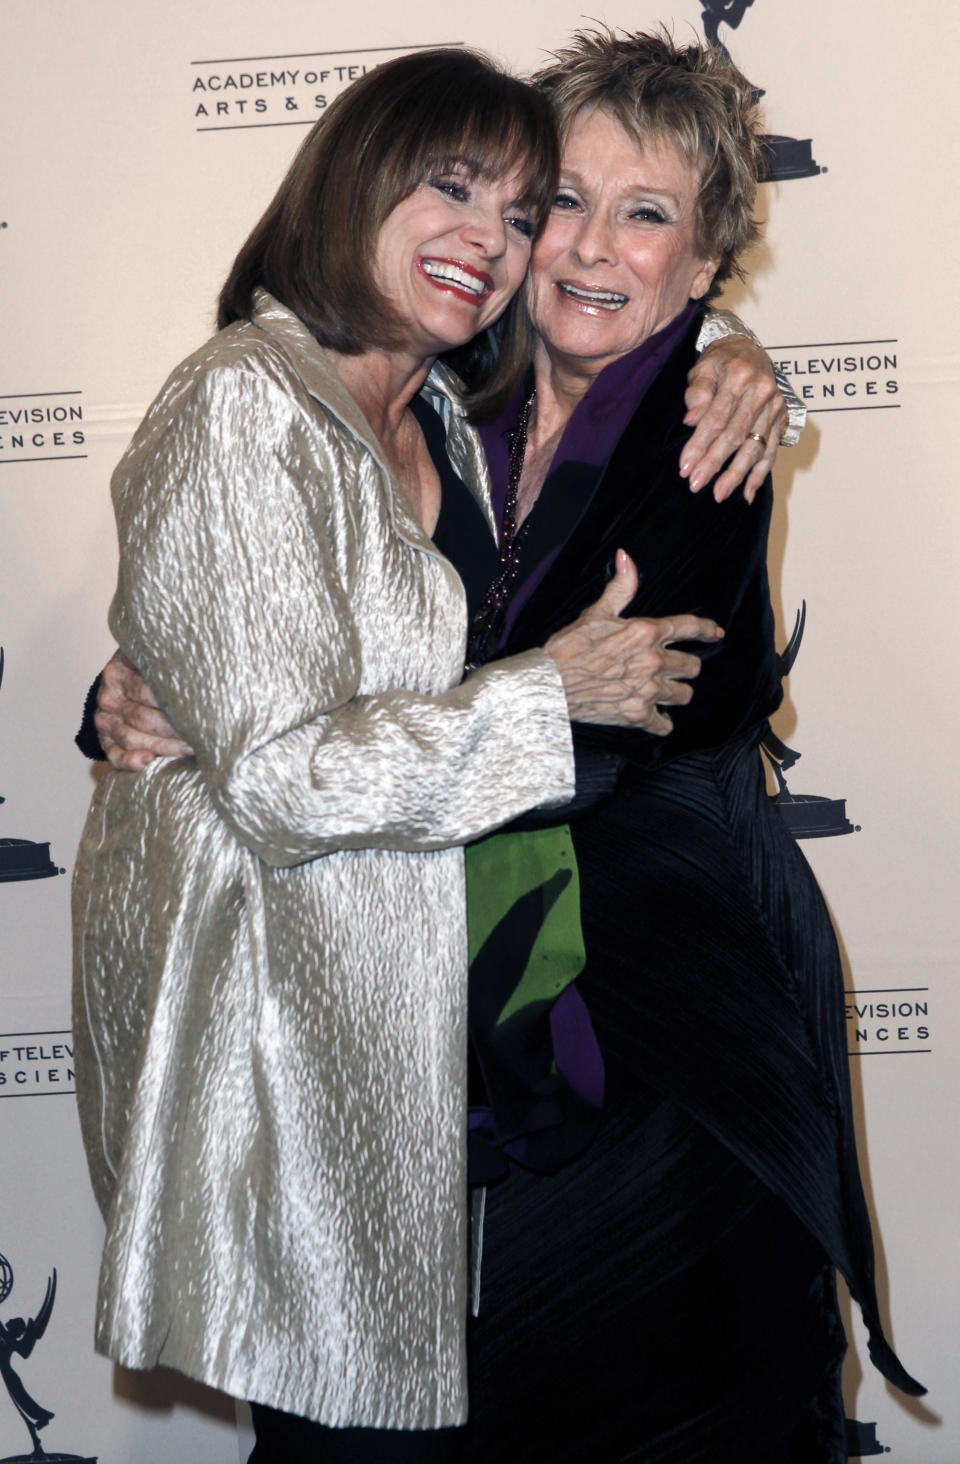 FILE - In this Thursday, Jan. 20, 2011 file photo, Inductee Cloris Leachman, right, and Valerie Harper pose together at the Academy of Television Arts and Sciences 20th Annual Hall of Fame Induction Gala in Beverly Hills, Calif. Valerie Harper, who scored guffaws and stole hearts as Rhoda Morgenstern on back-to-back hit sitcoms in the 1970s, has died, Friday, Aug. 30, 2019. She was 80. (AP Photo/Matt Sayles, File)